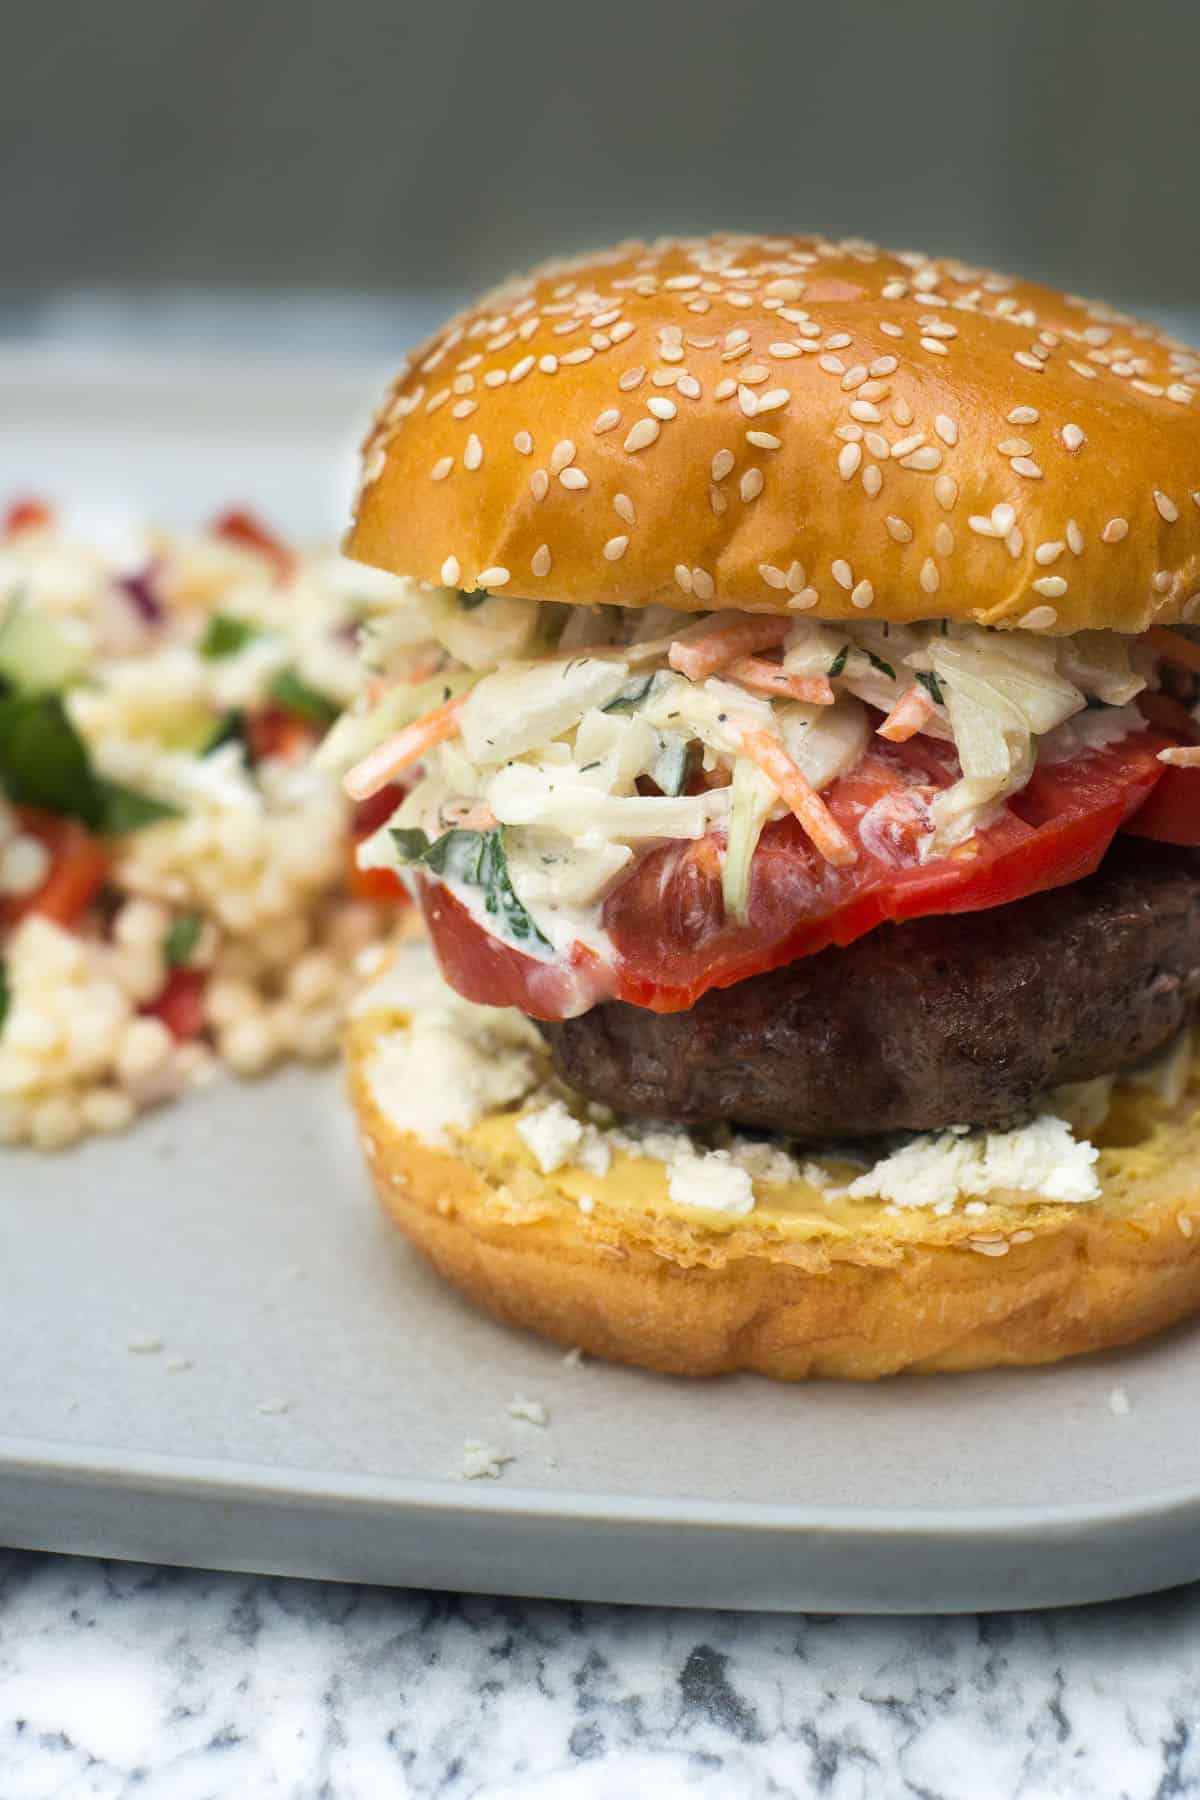 The Step-By-Step Grilling Method - Brioche Burgers On Charcoal